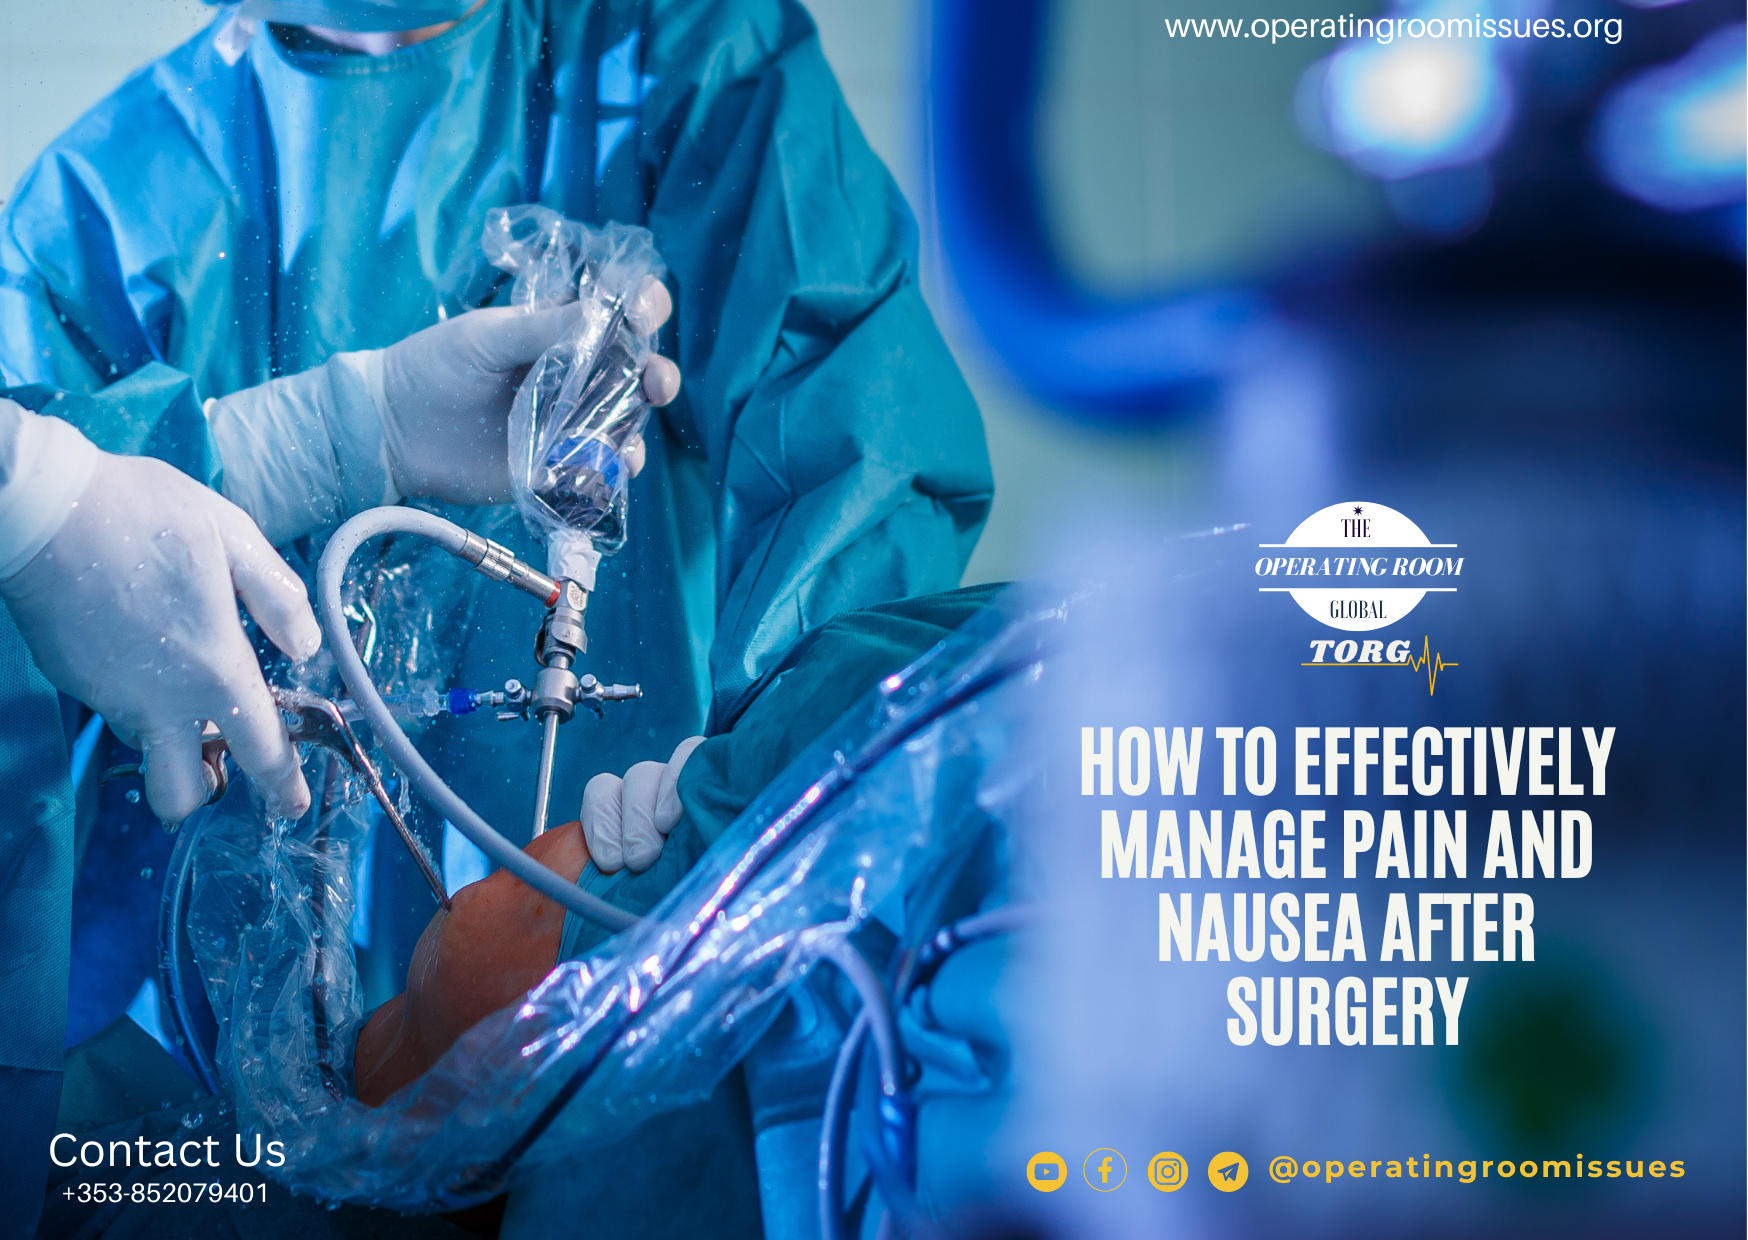 How to effectively manage pain and nausea after surgery